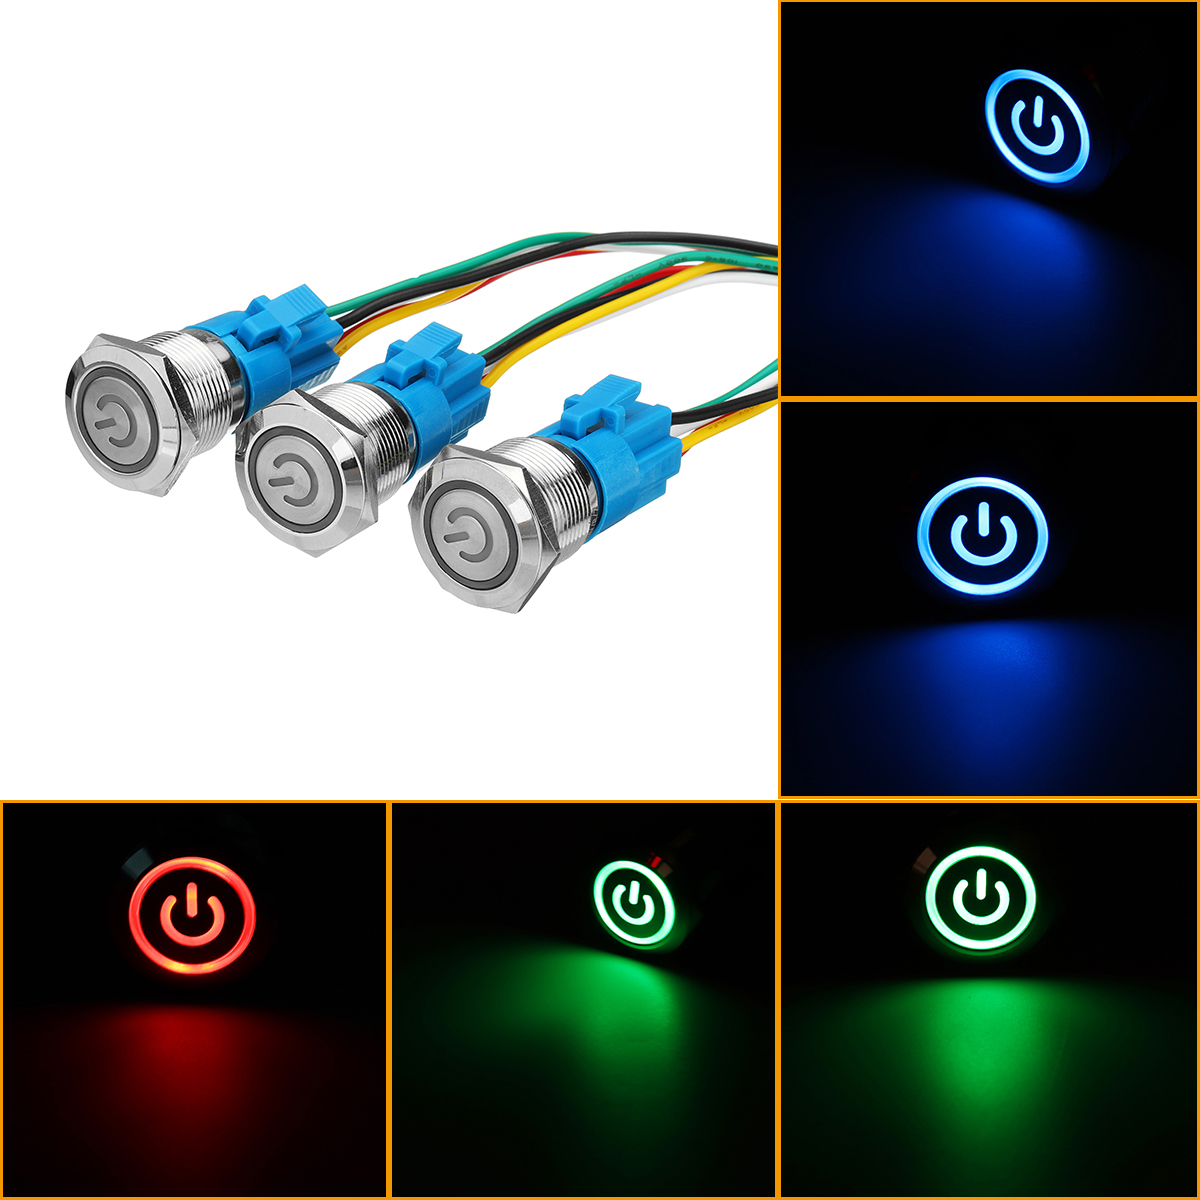 19mm Metal Self-locking Switch 12V LED 5Pin ON-OFF Push Button Switch With Wire Waterproof